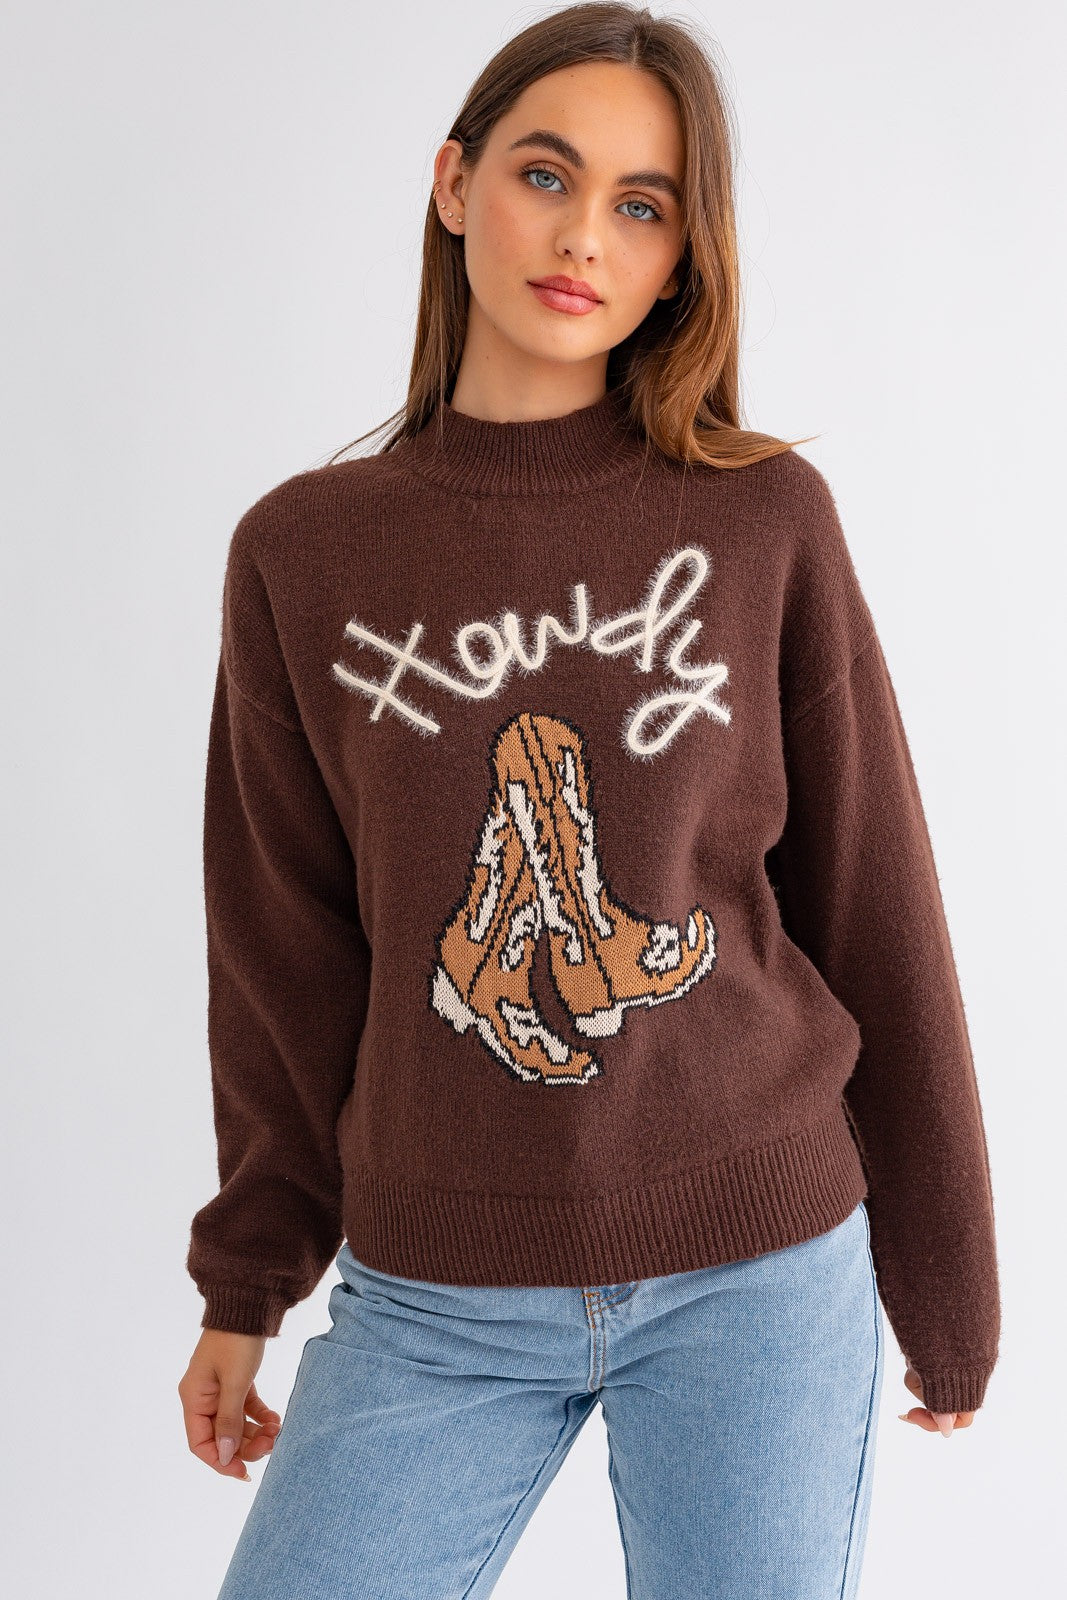 Howdy Boots Sweater